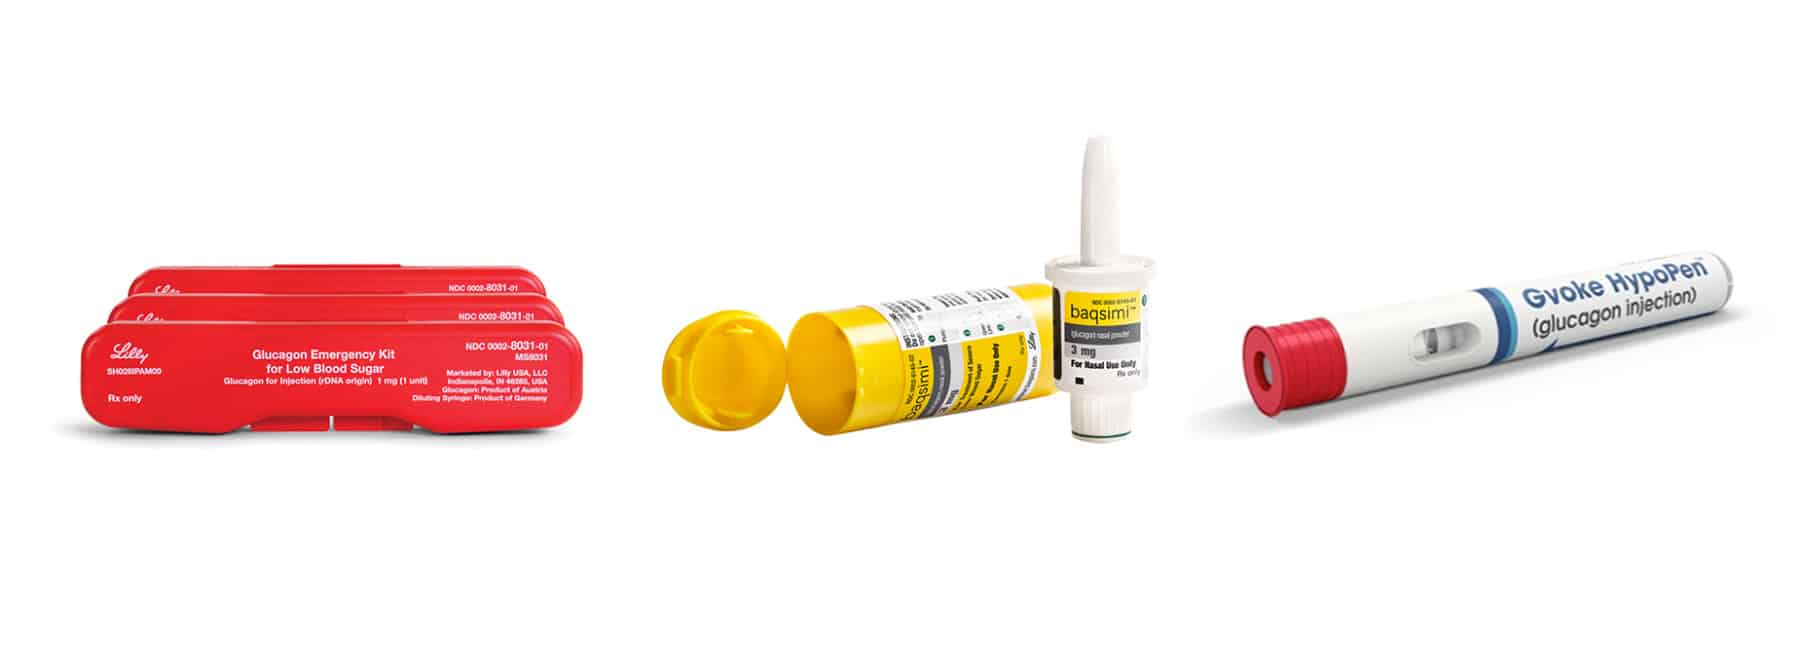 3 red glucagon injection kits, yellow baqsimi nasal glucagon, and Gvoke HypoPen